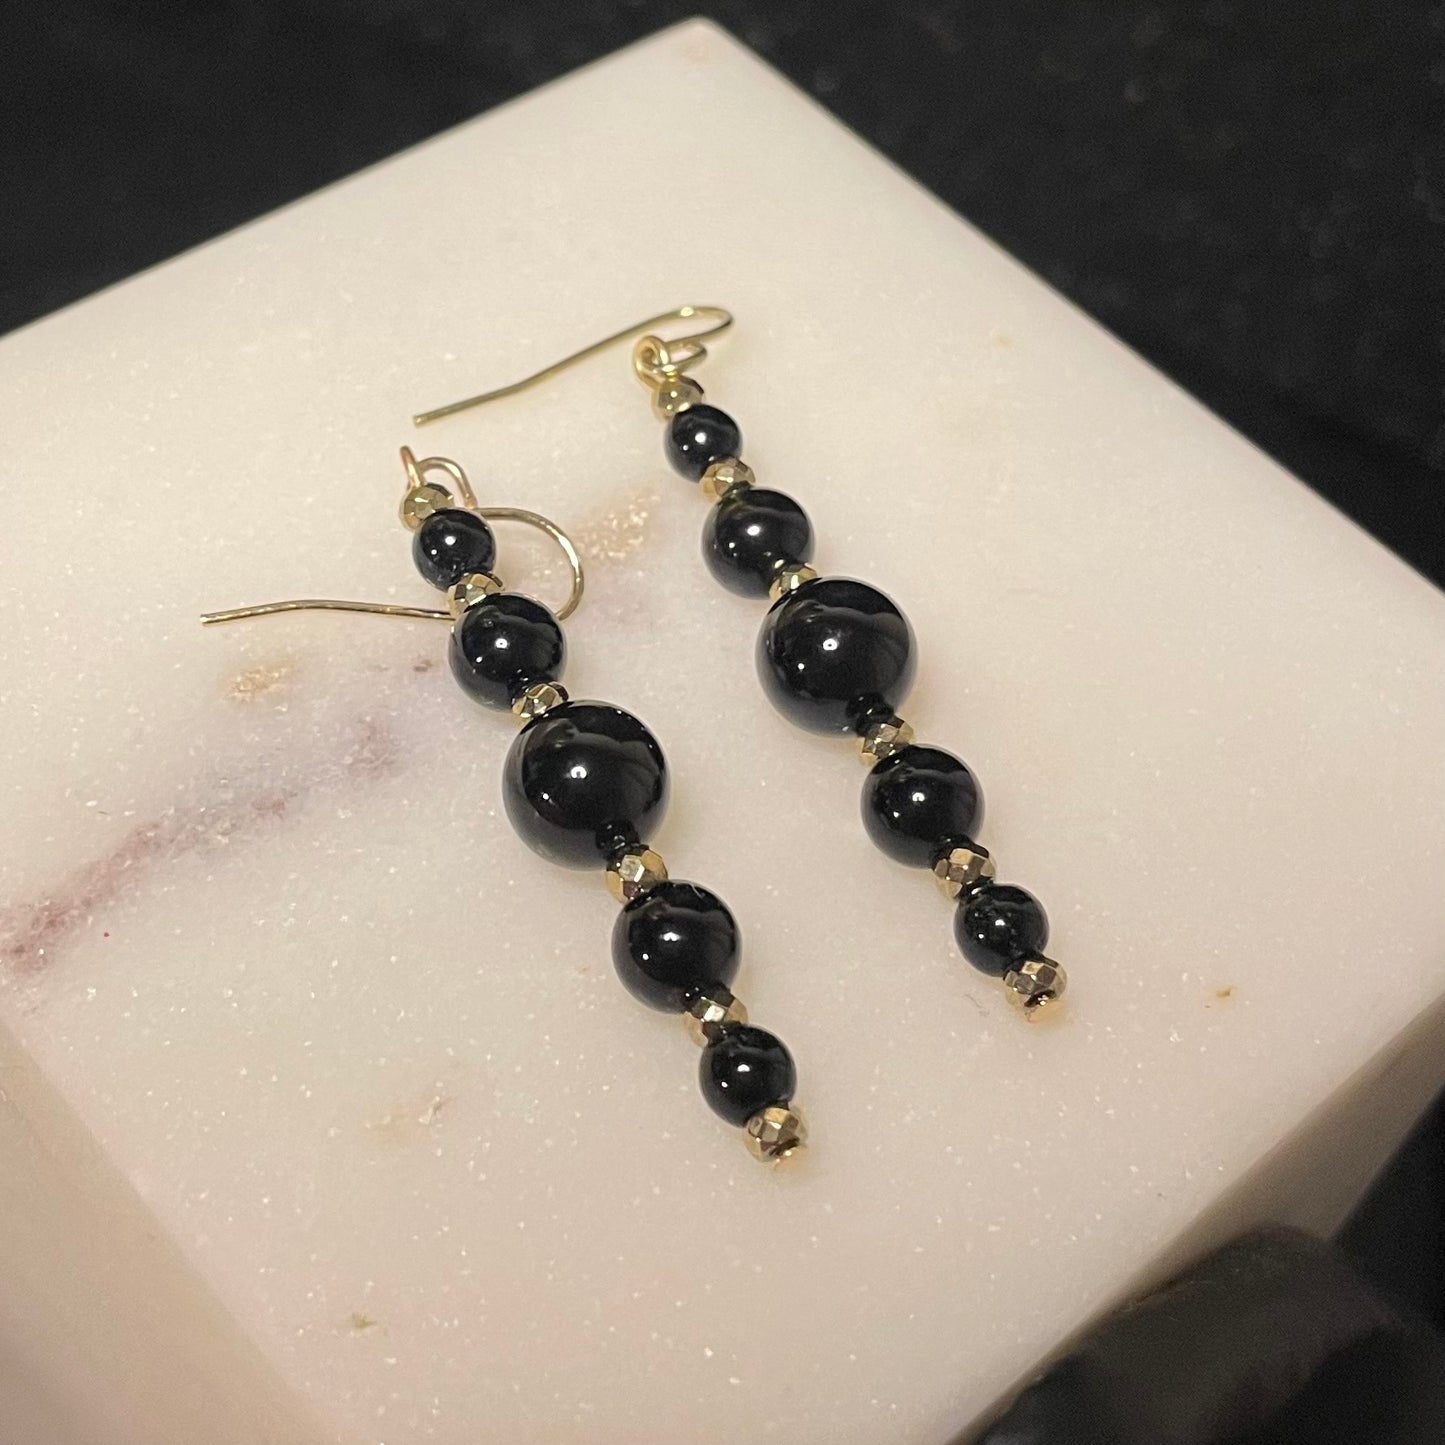 Black onyx and gold (pyrite hematite) accents dangles